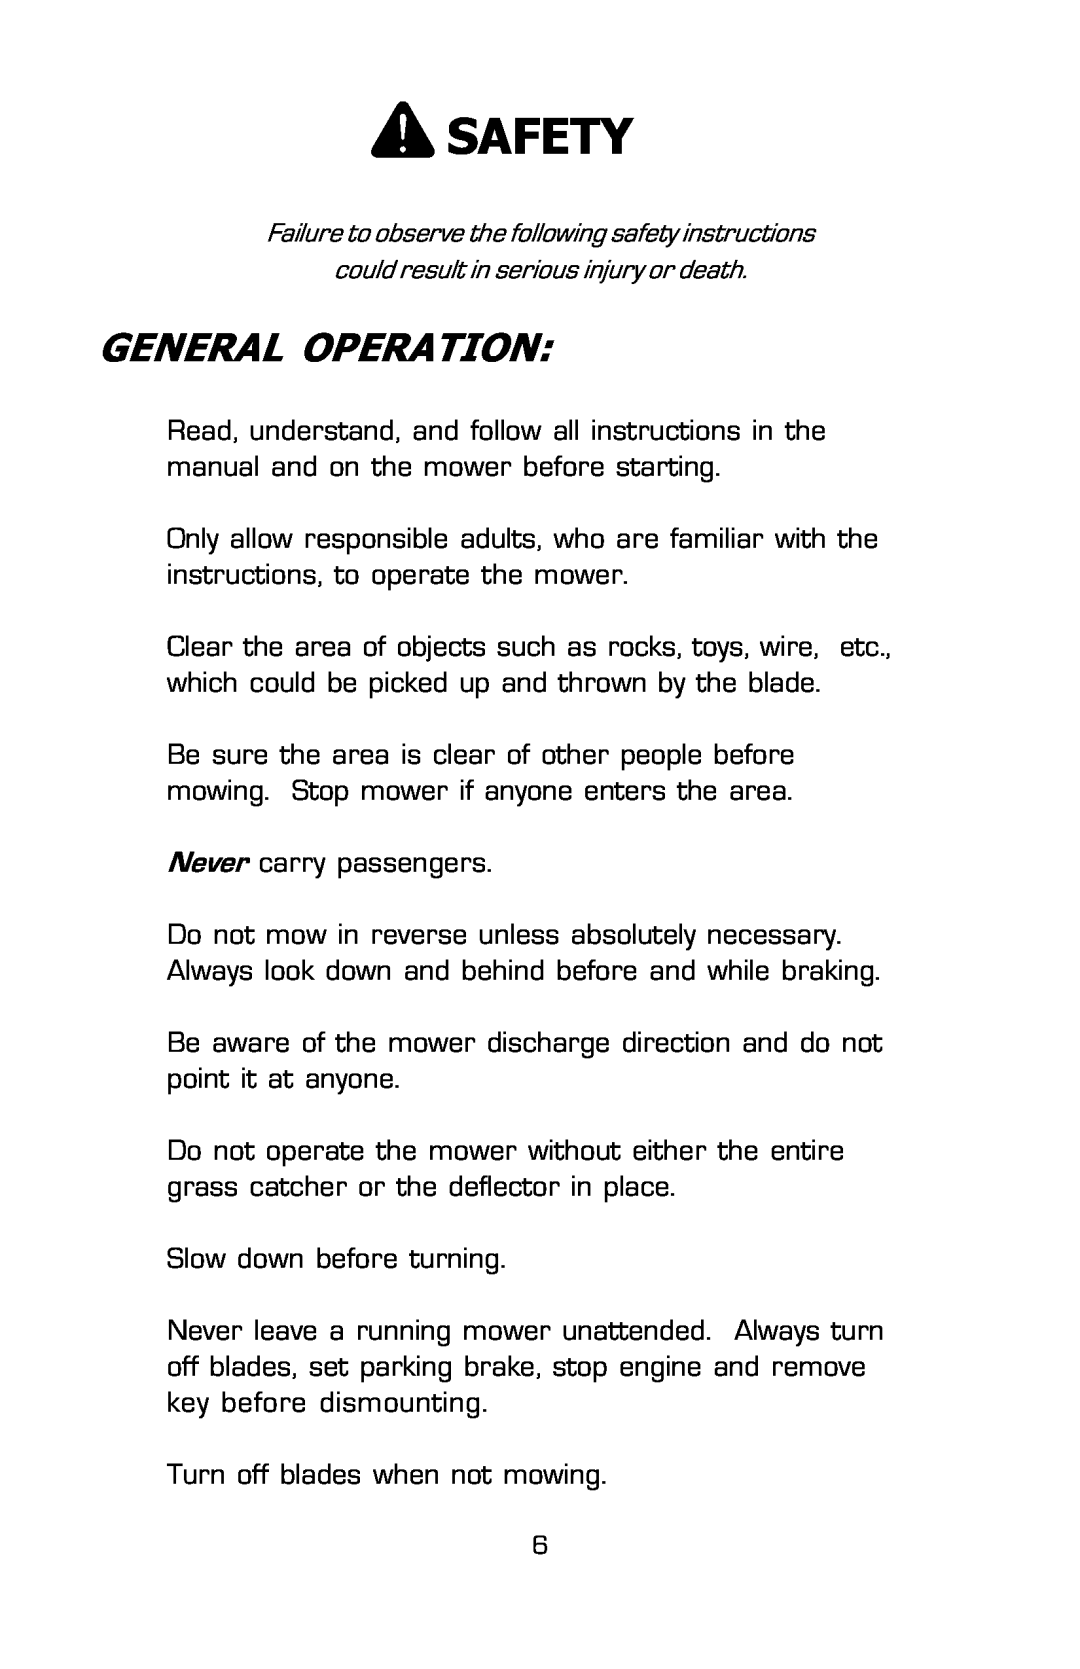 Dixon 16134-0803 manual Safety, General Operation 